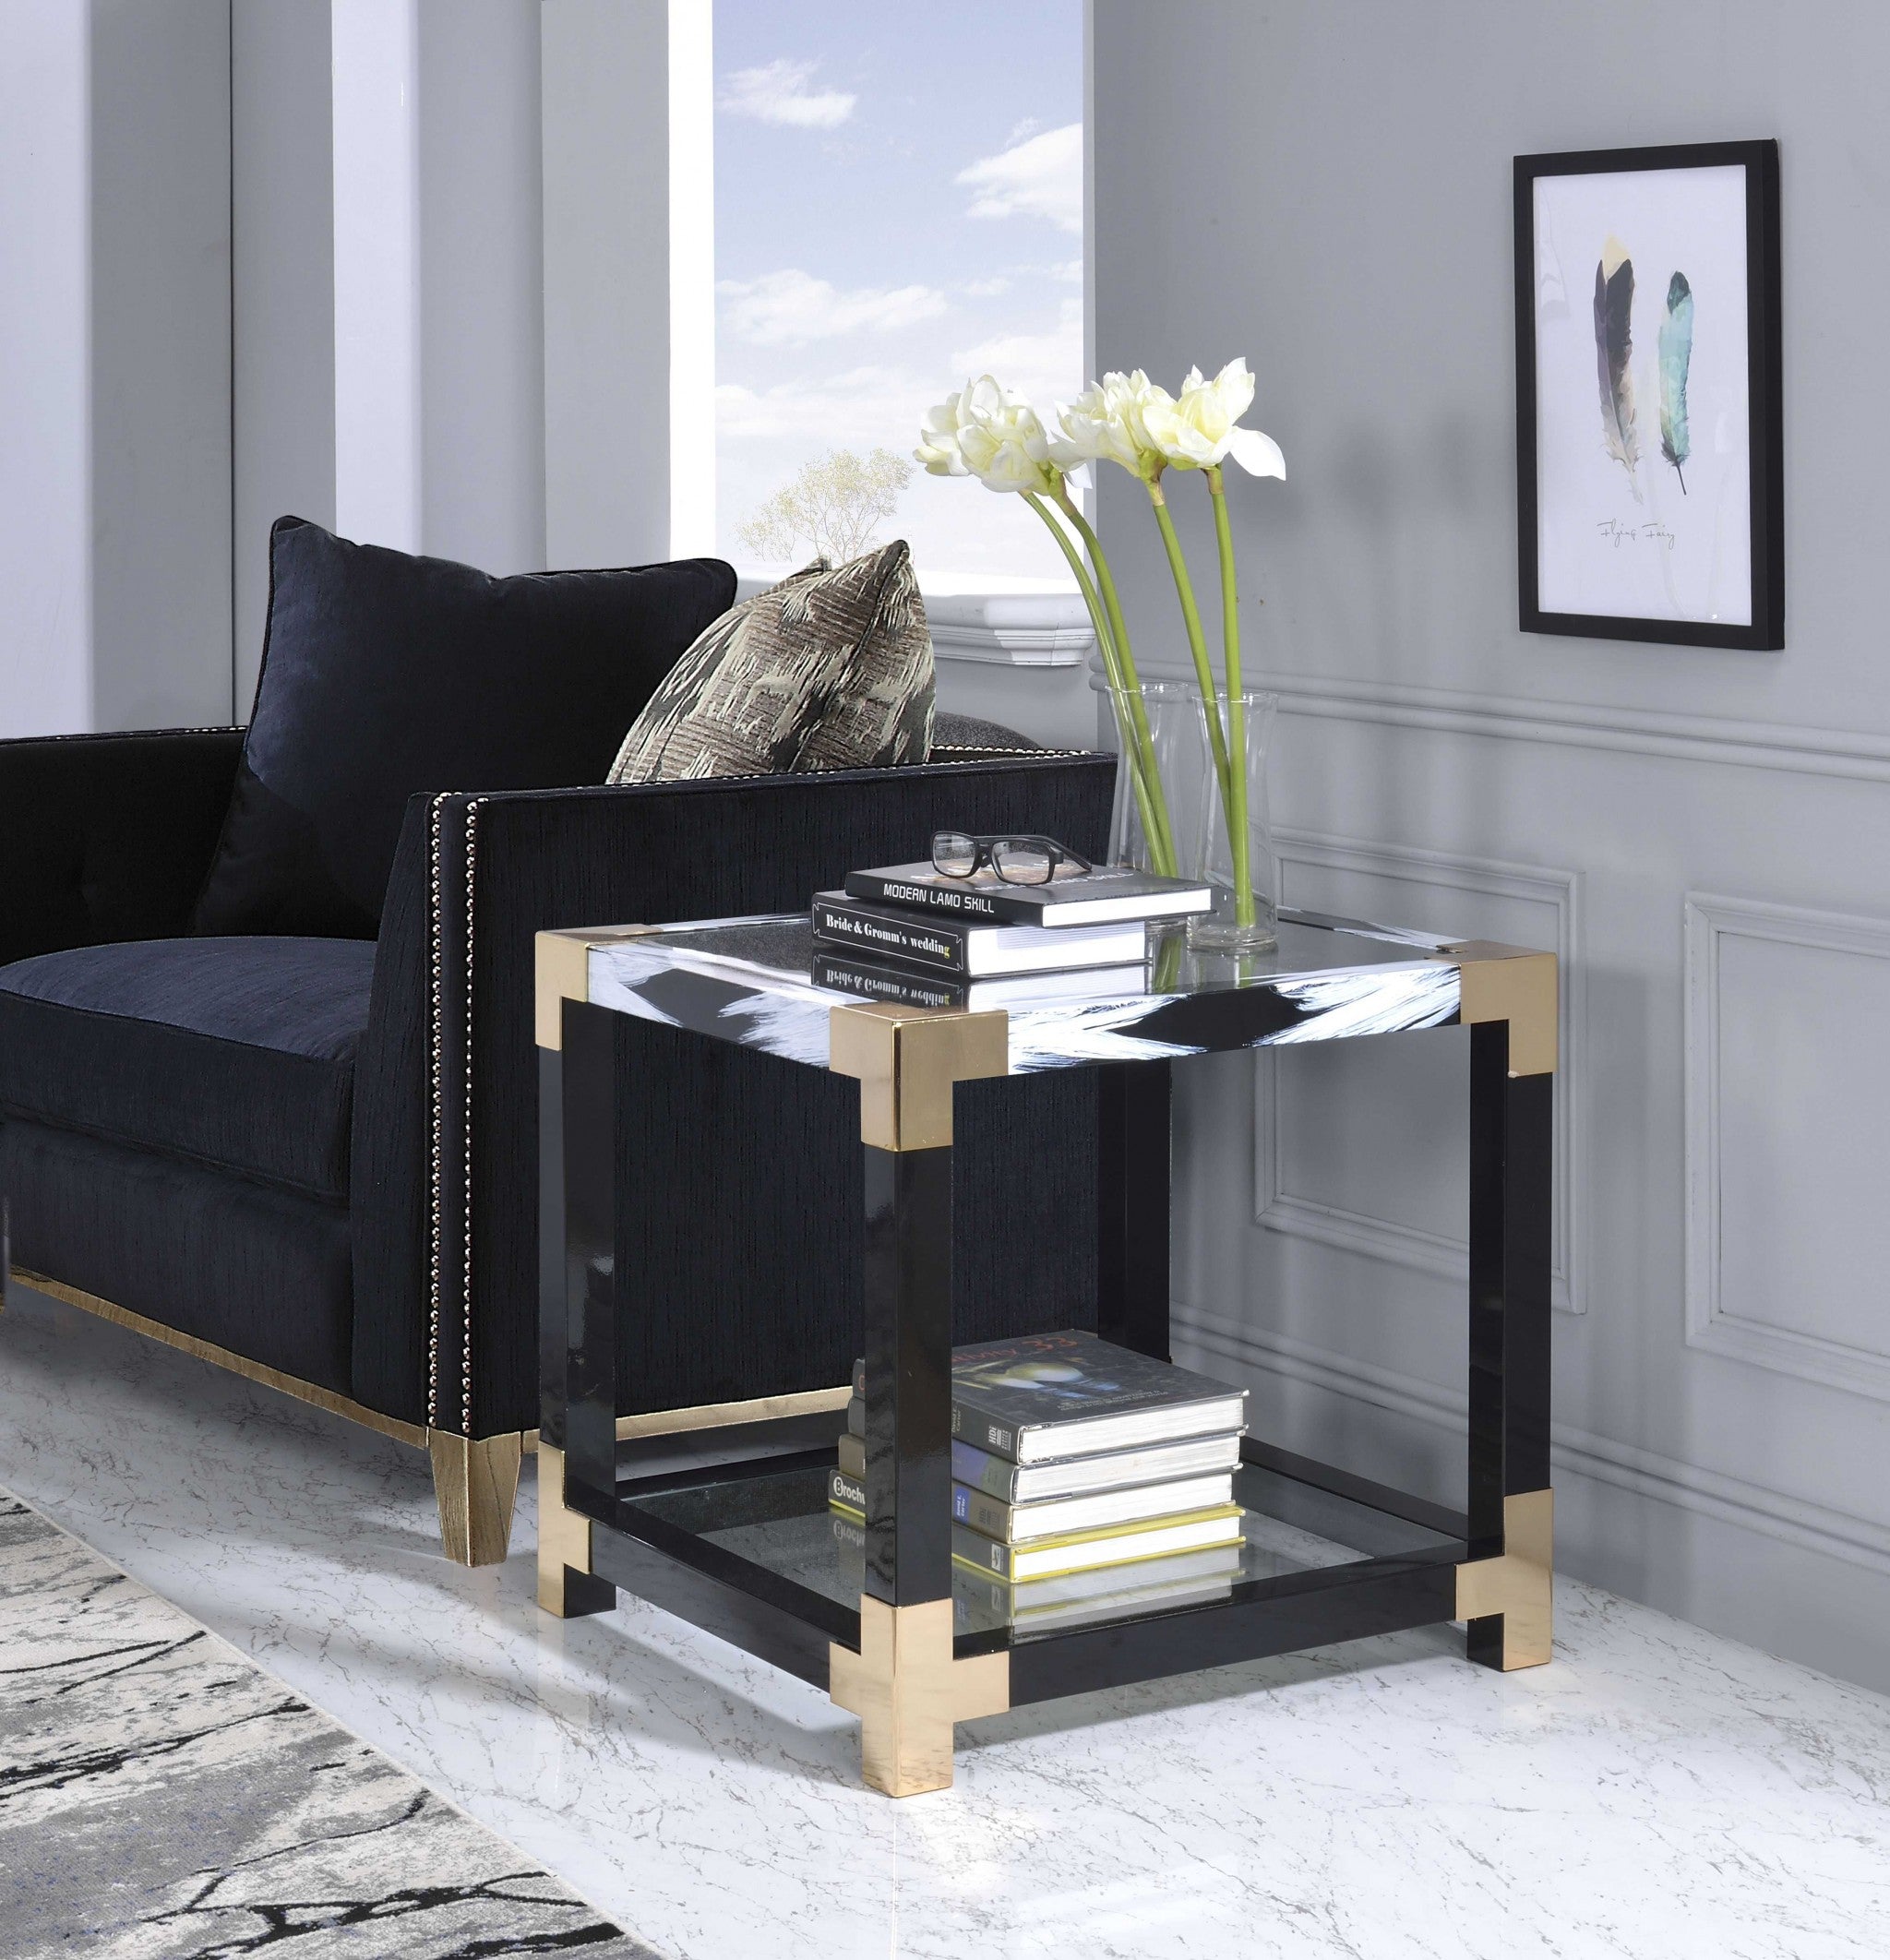 25" Black and Gold And Clear Glass Square End Table With Shelf With Magazine Holder